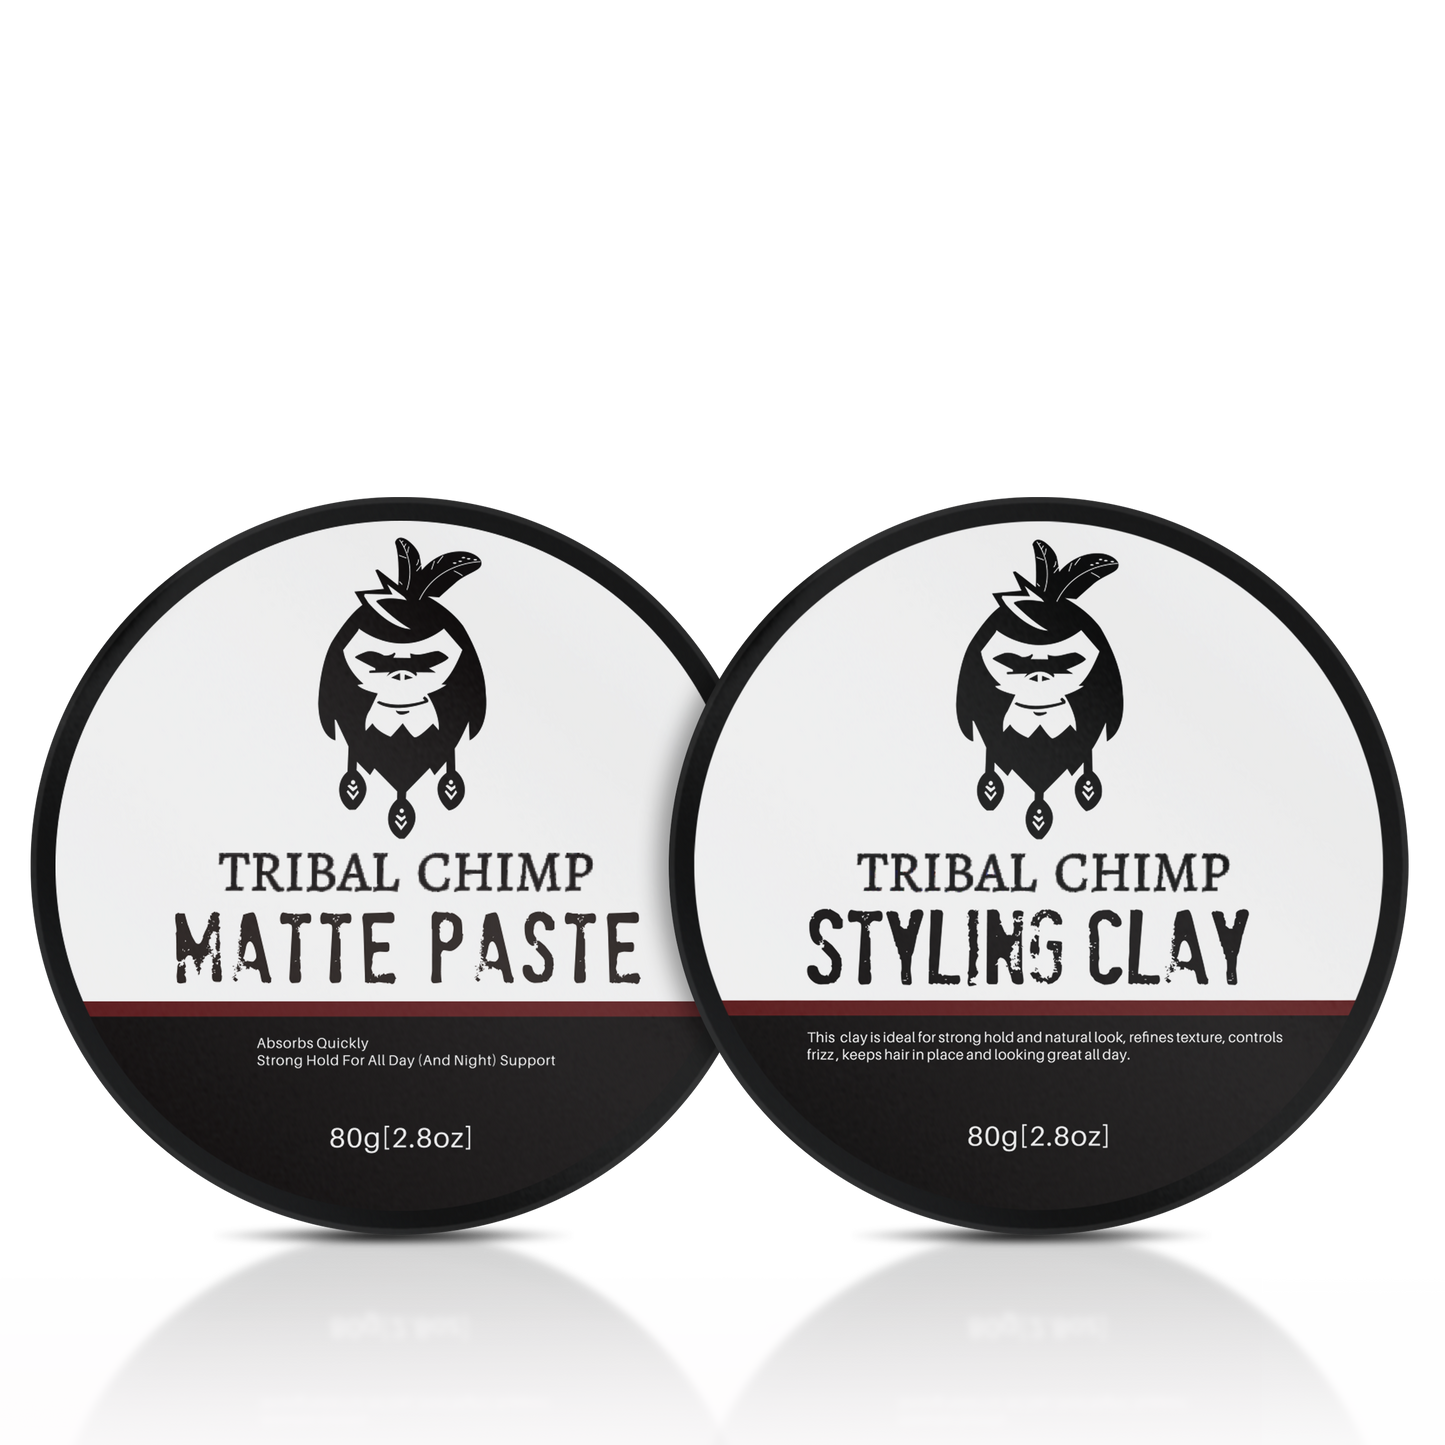 Matte Paste + Styling Clay